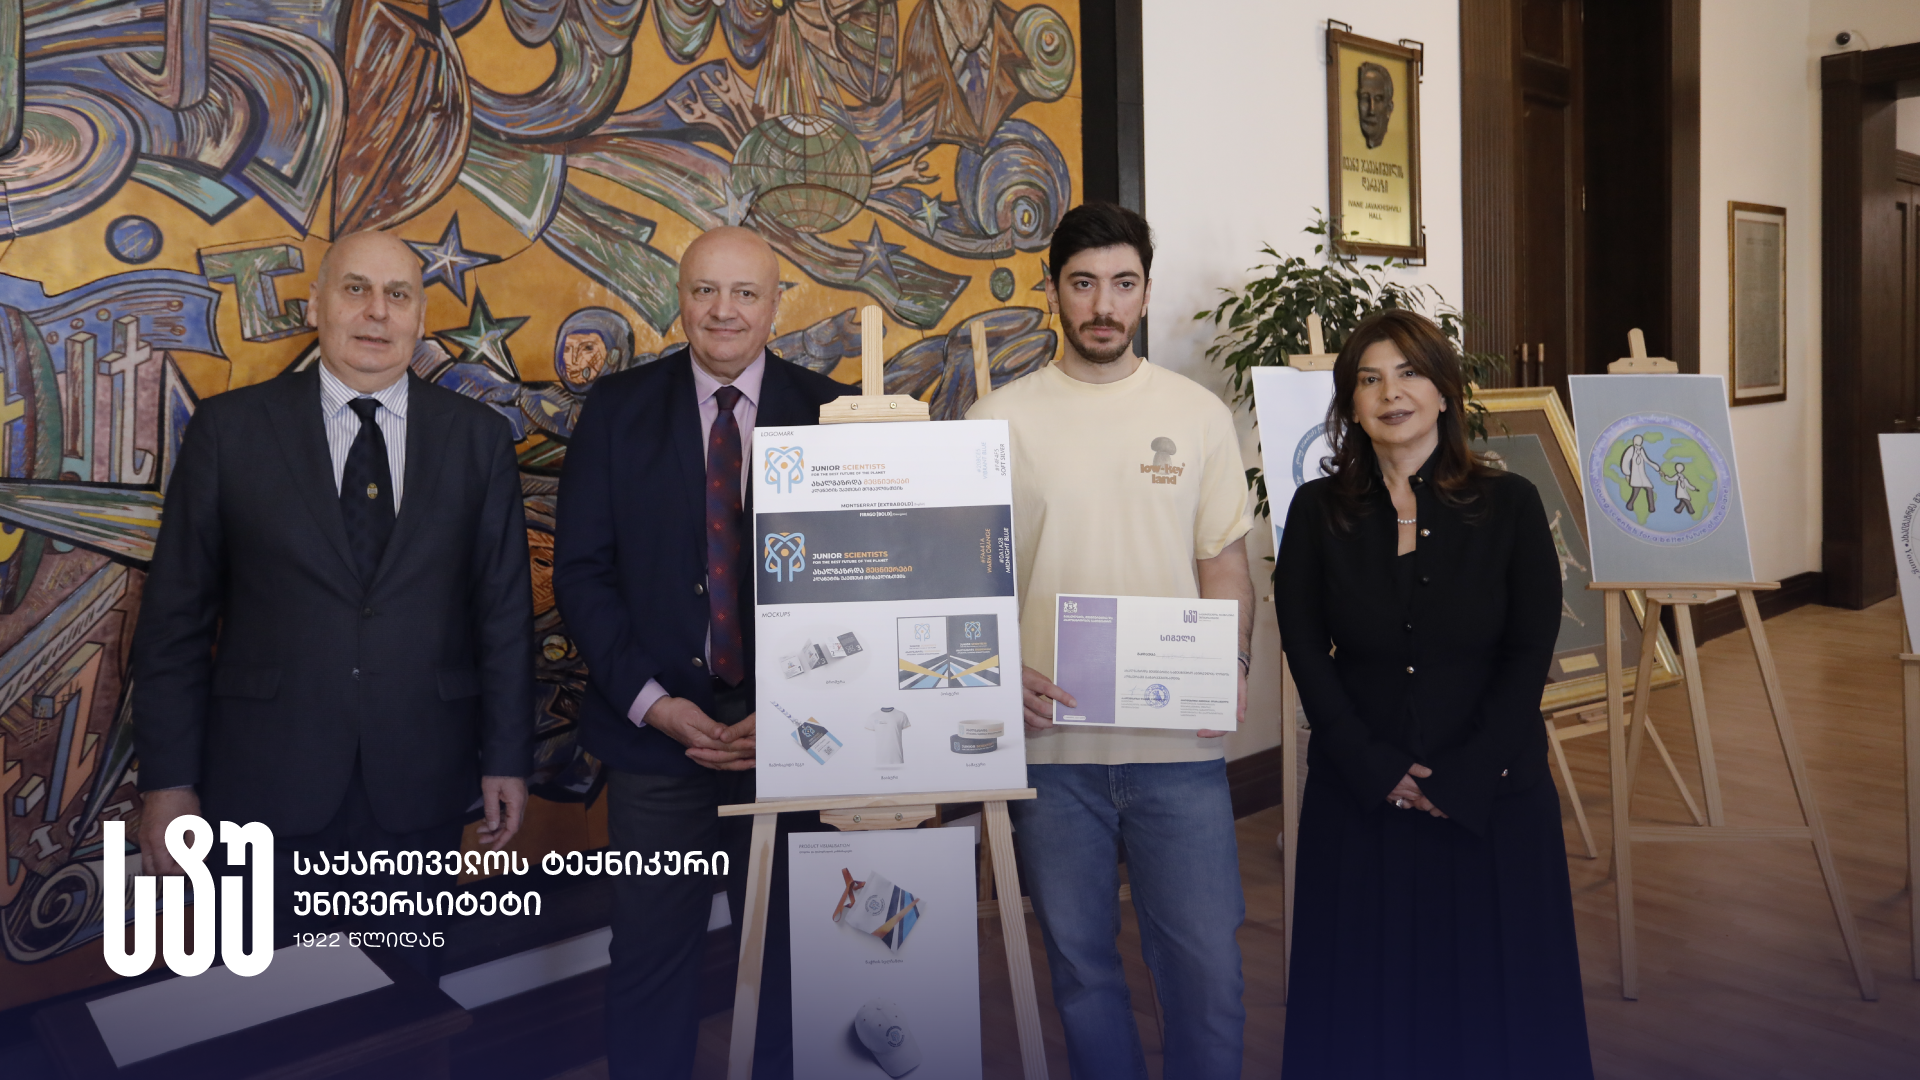 At GTU The winner of the “Young Scientists Scientific Week” logo contest was revealed  